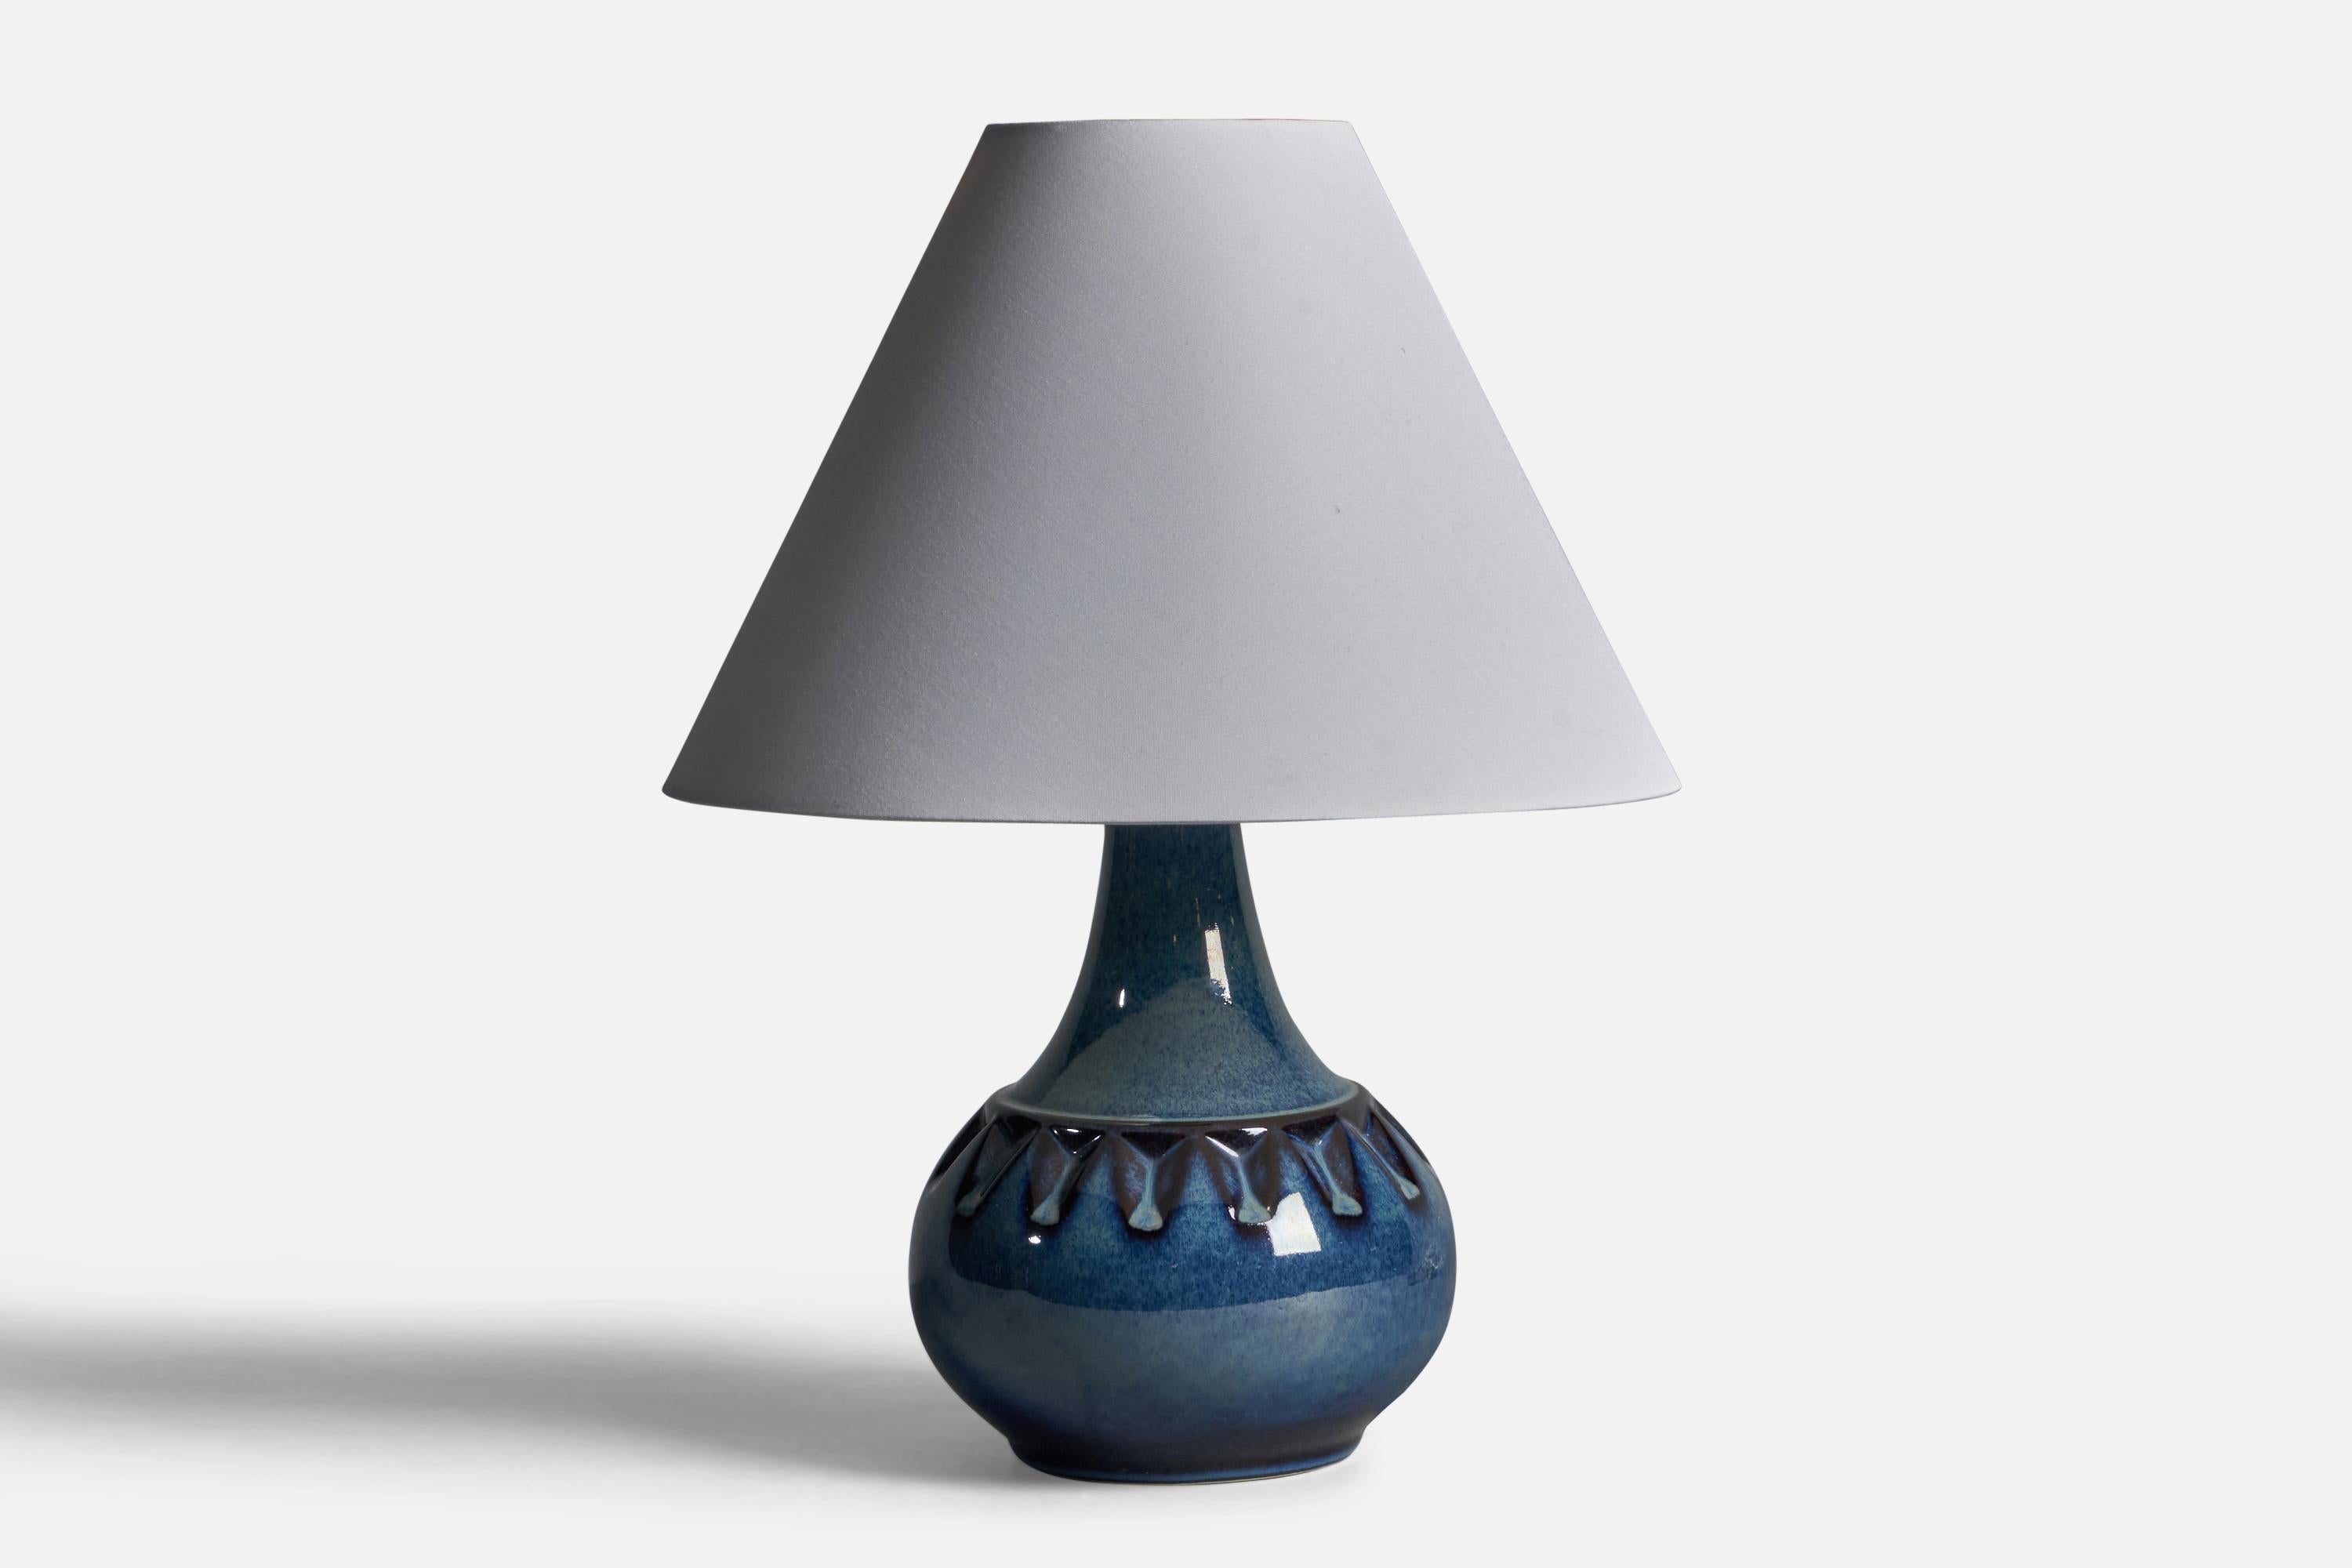 A blue-glazed stoneware table lamp designed and produced by  Søholm, Bornholm, Denmark, 1960s.

Dimensions of Lamp (inches): 10.25